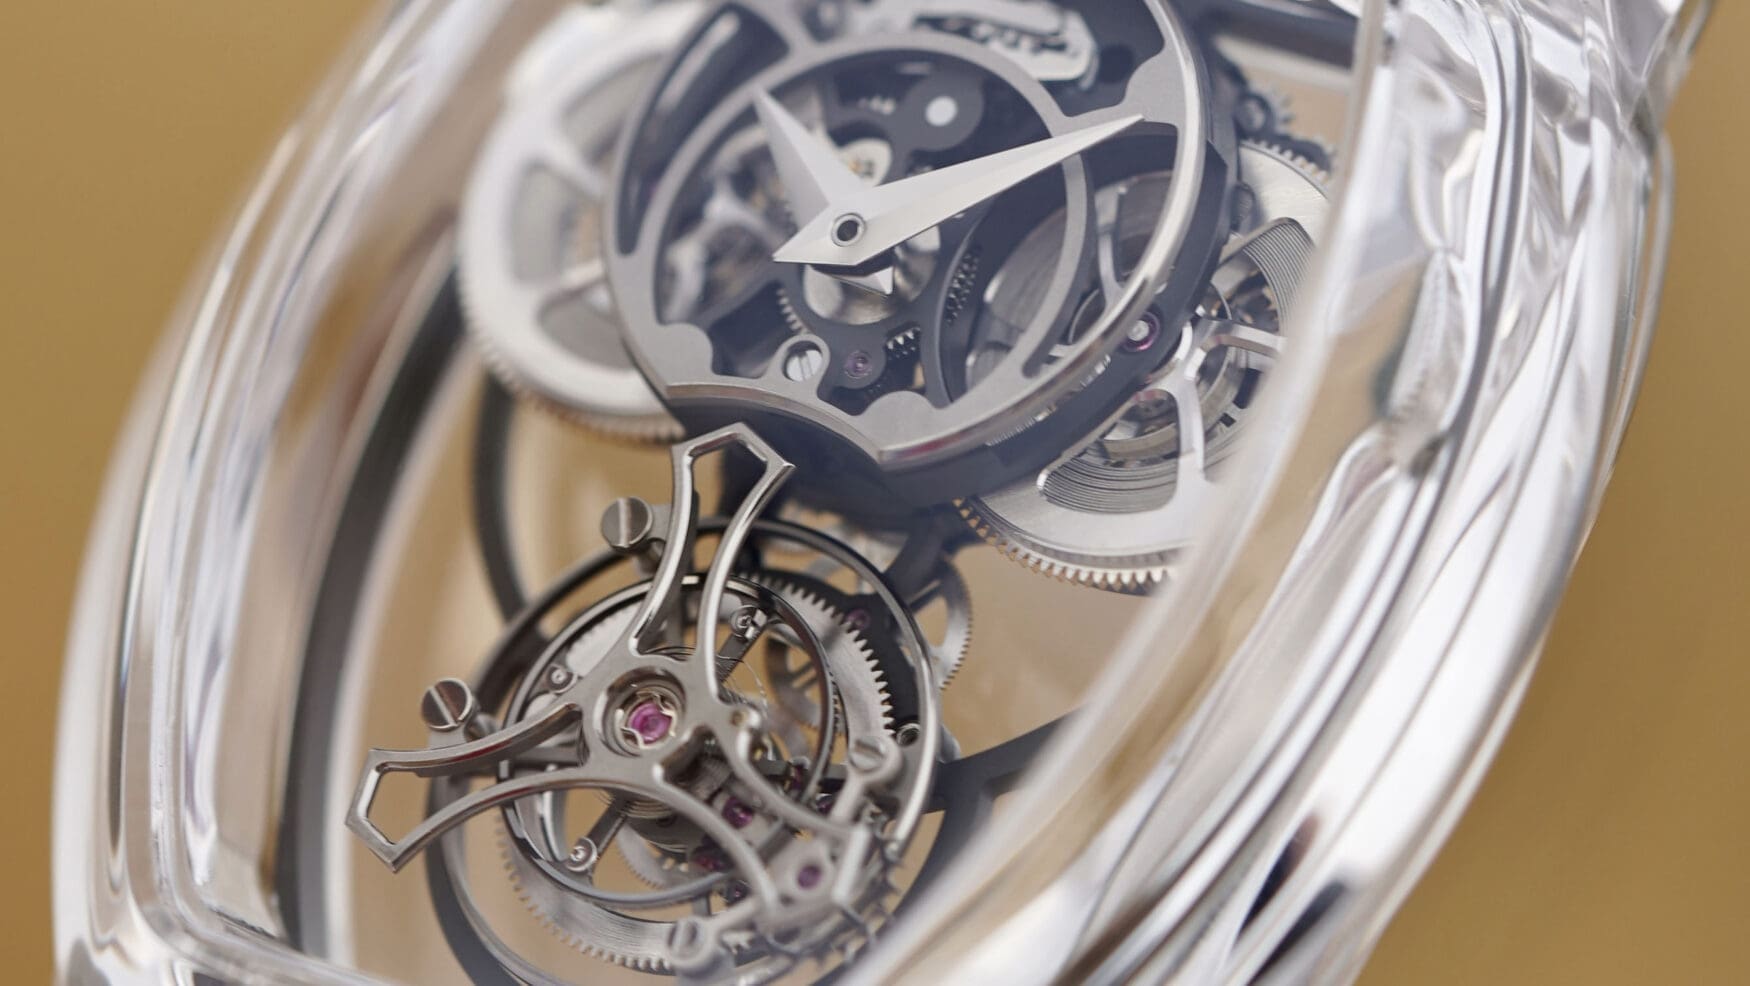 The ArtyA Curvy Purity Tourbillon is a great example of artisanal sapphire watchmaking